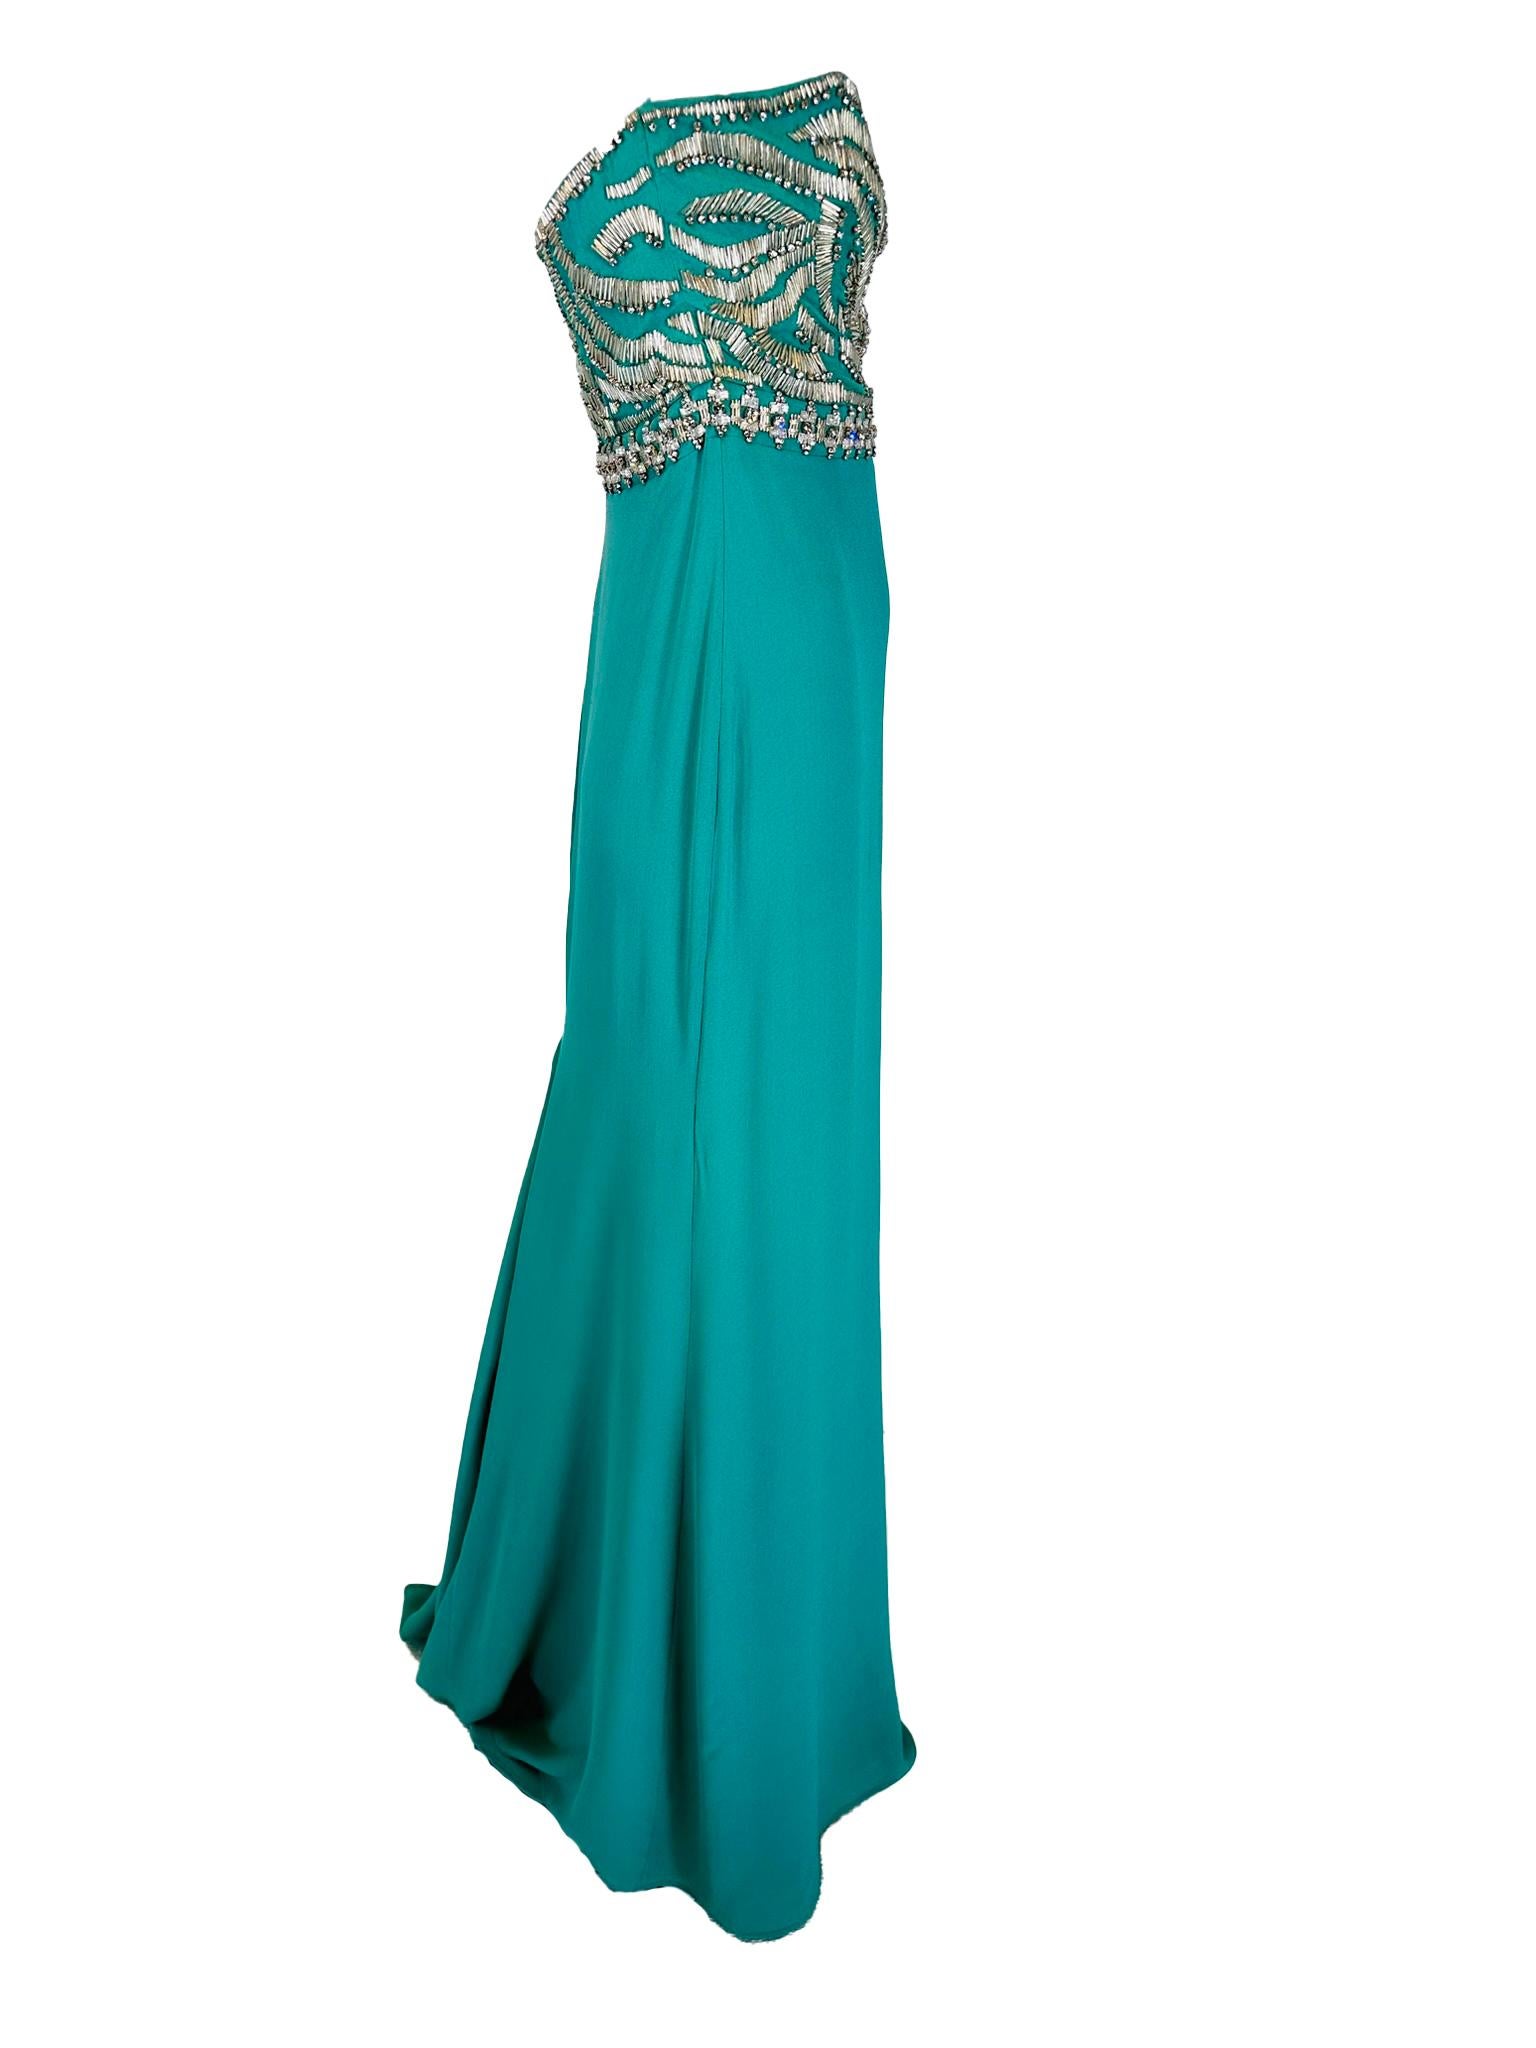 Roberto Cavalli Turquoise Silk Rhinestone Bodice Strapless Evening Gown  42 In Good Condition For Sale In West Palm Beach, FL